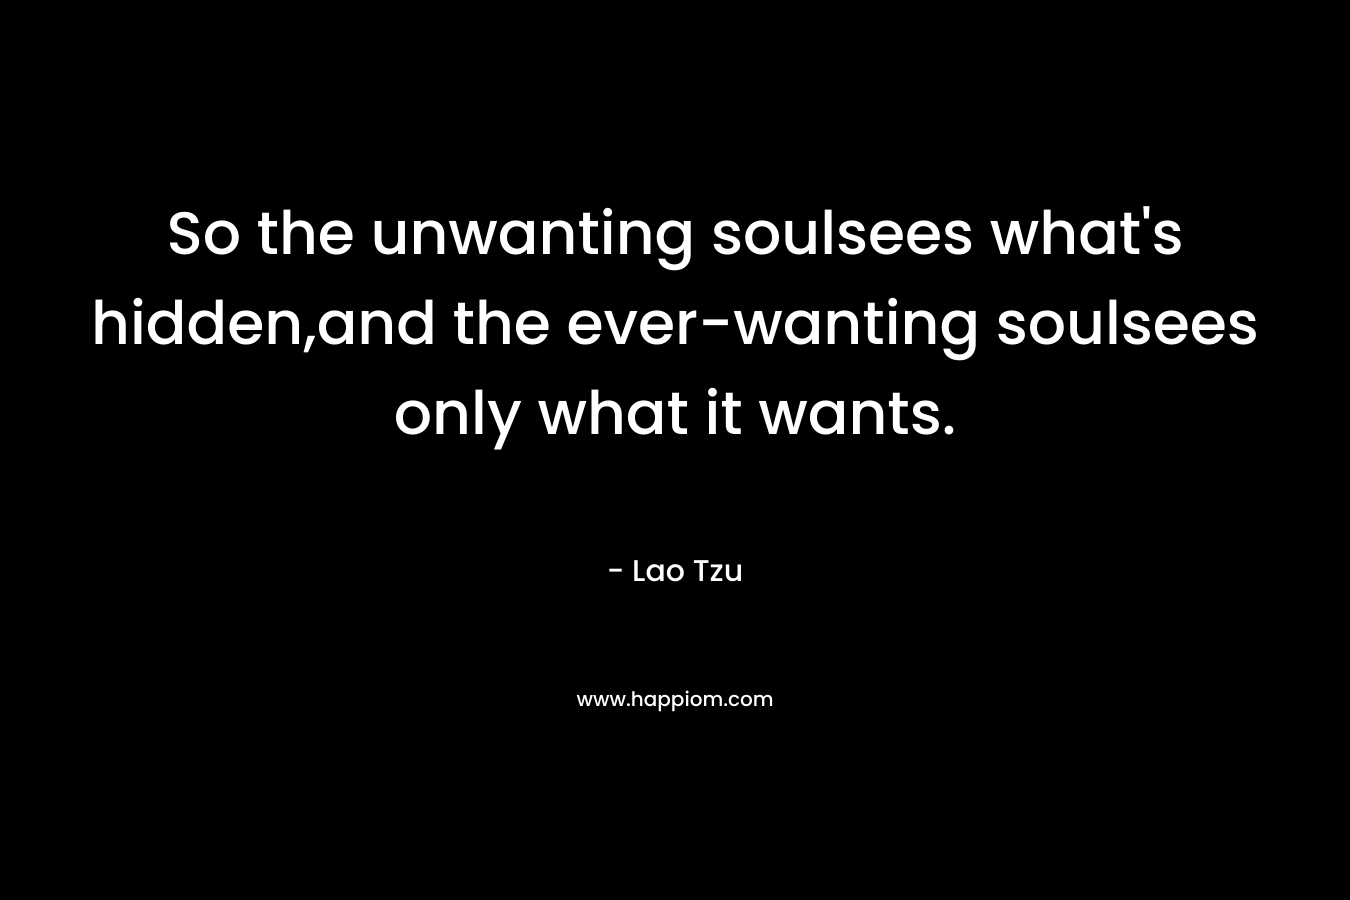 So the unwanting soulsees what’s hidden,and the ever-wanting soulsees only what it wants. – Lao Tzu